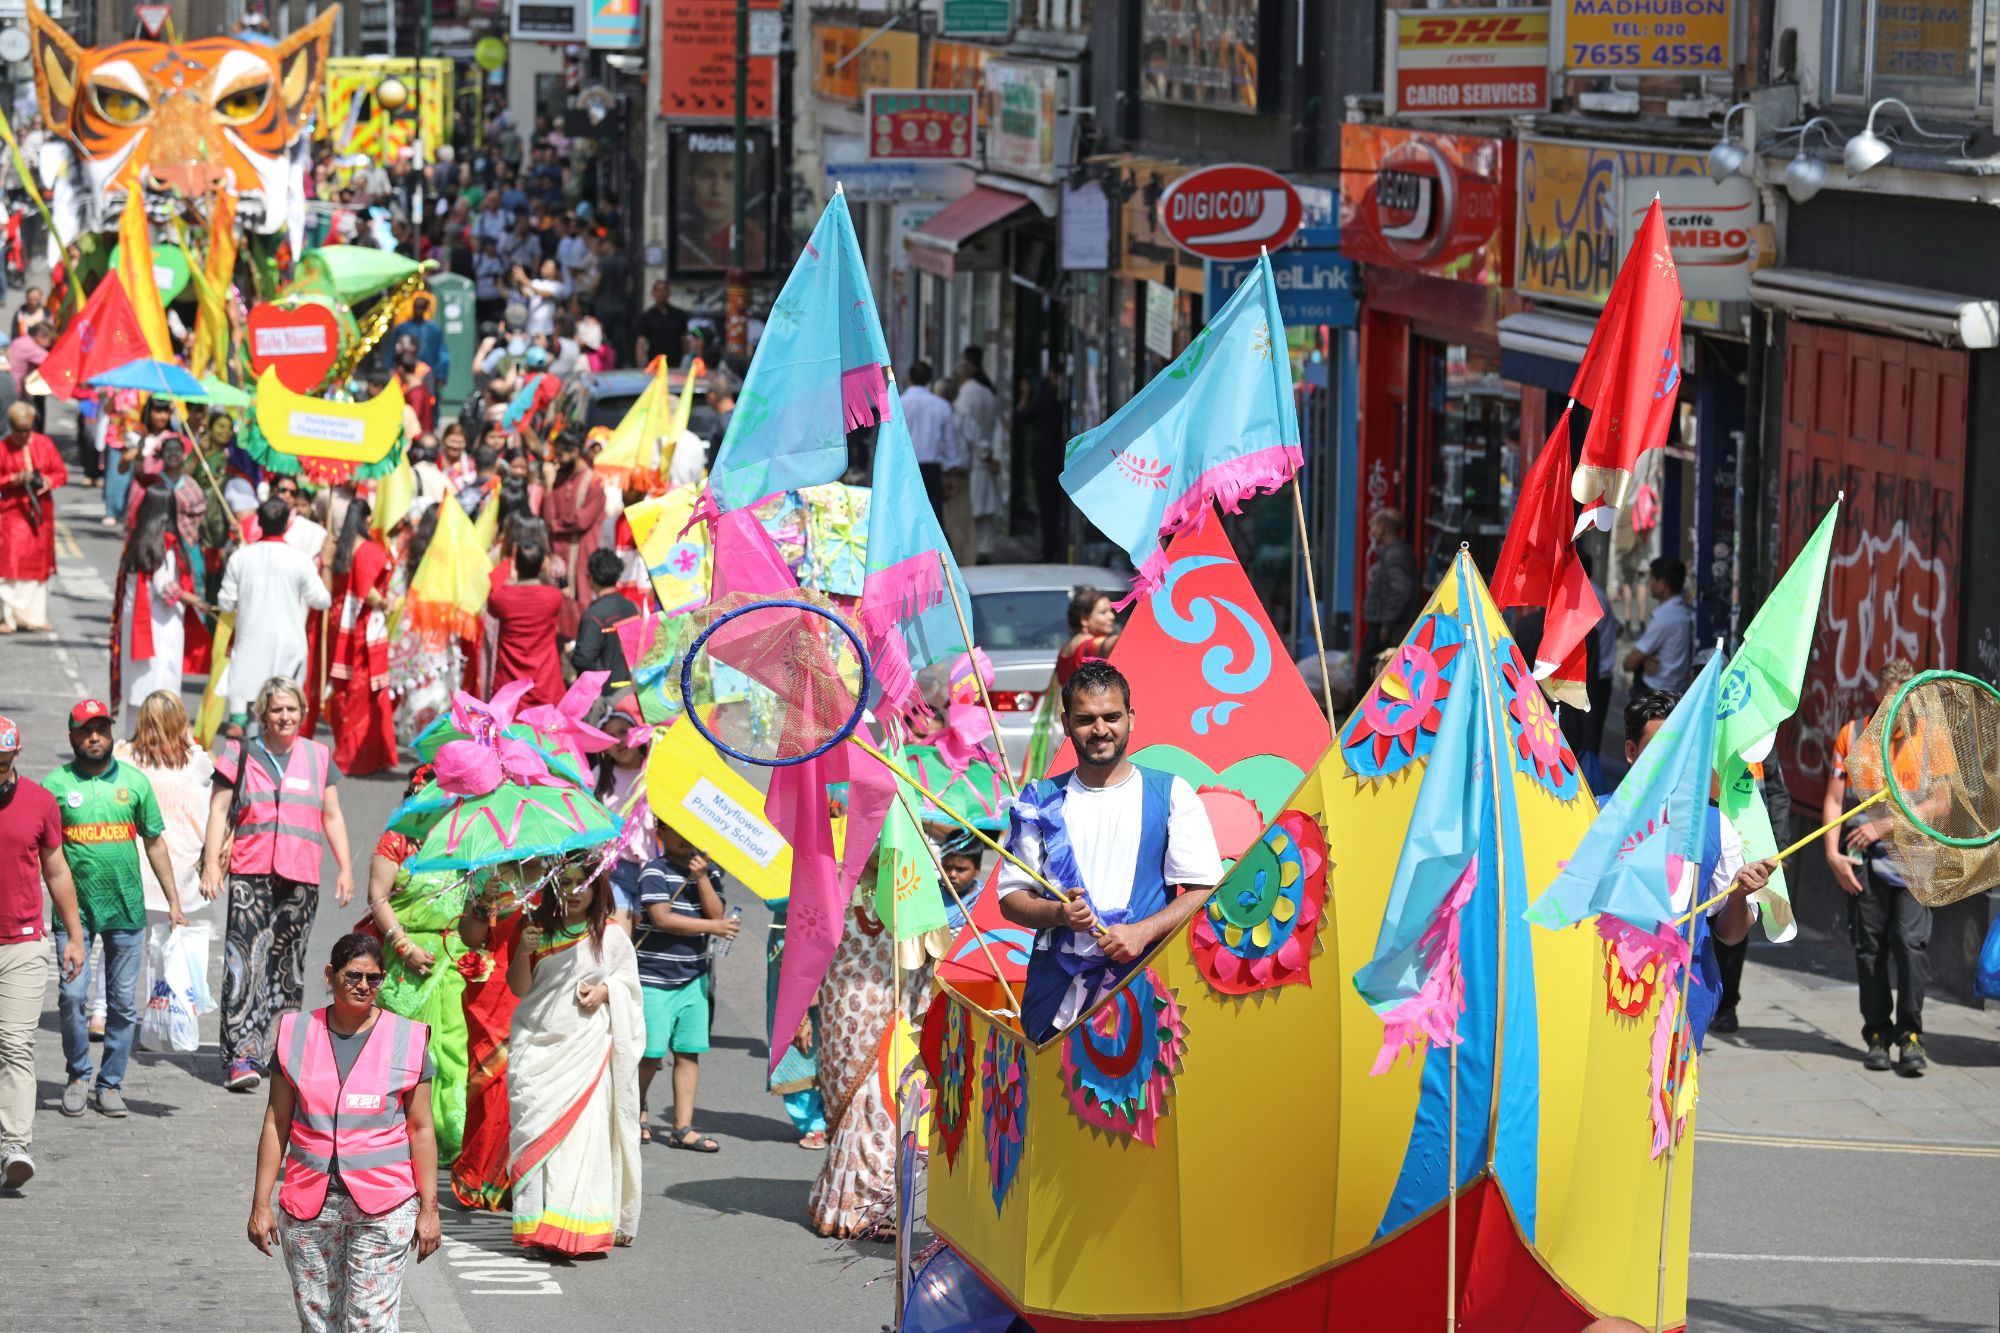 A carnival parade makes its way up a road. People wear colourful clothing, and carry flags. At the head of the procession a man walks inside a boat made of fabric stretched around a frame.